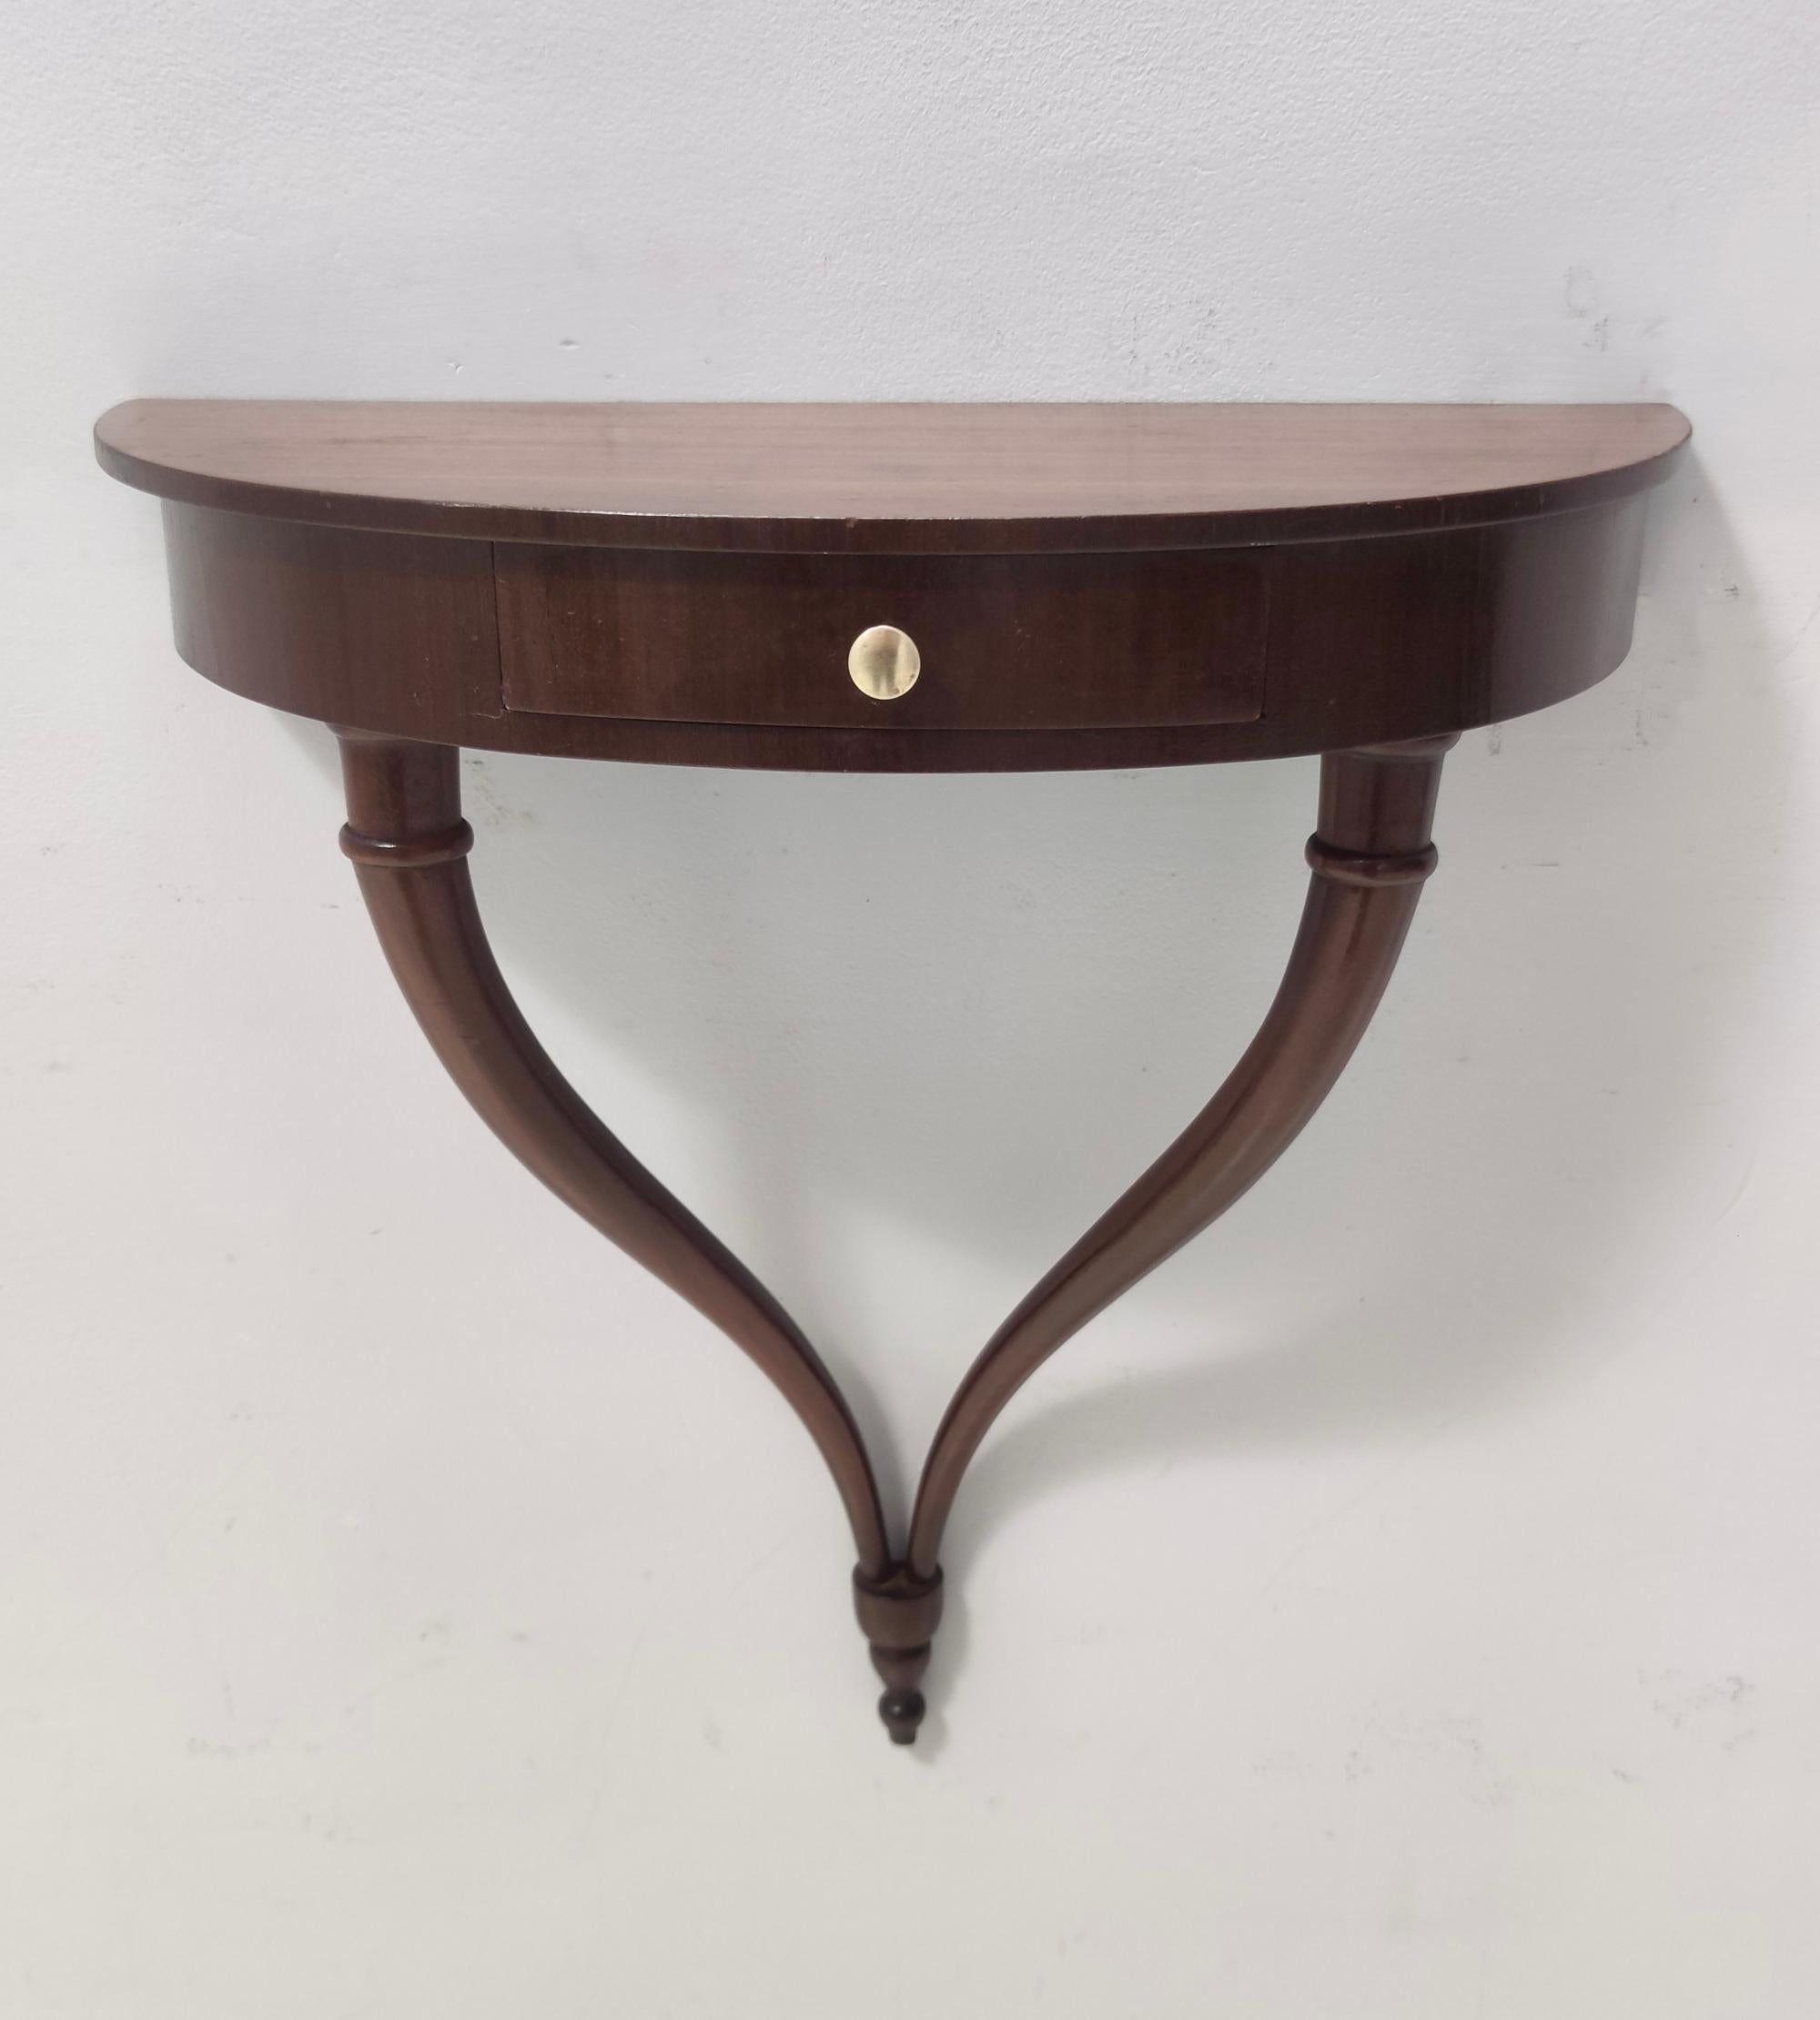 Italian Beech Wall-Mounted Console Table / Nightstand attr. to Guglielmo Ulrich, Italy